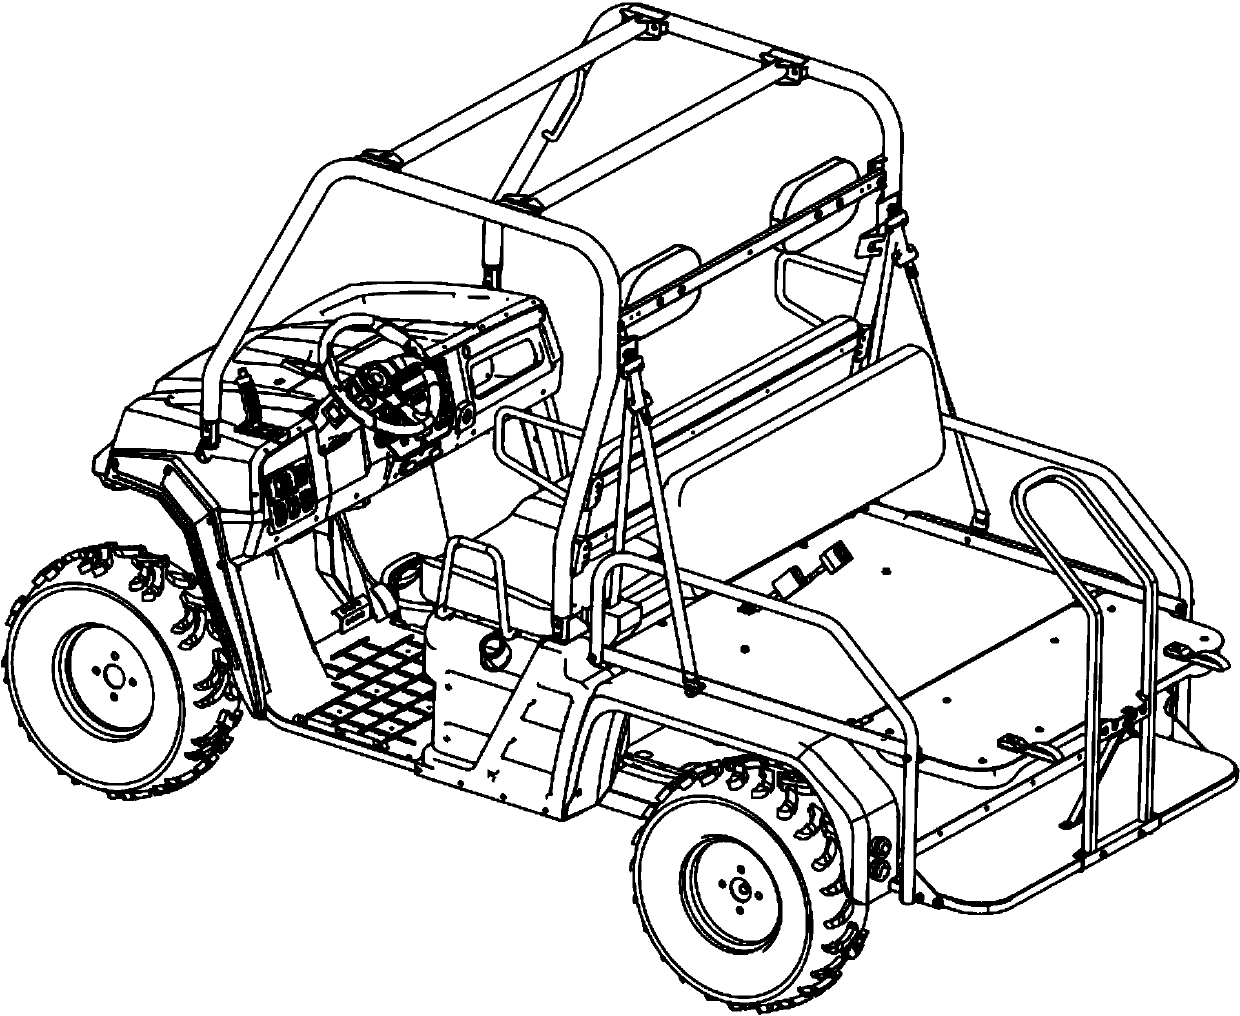 Novel rear seat assembly of all-terrain vehicle